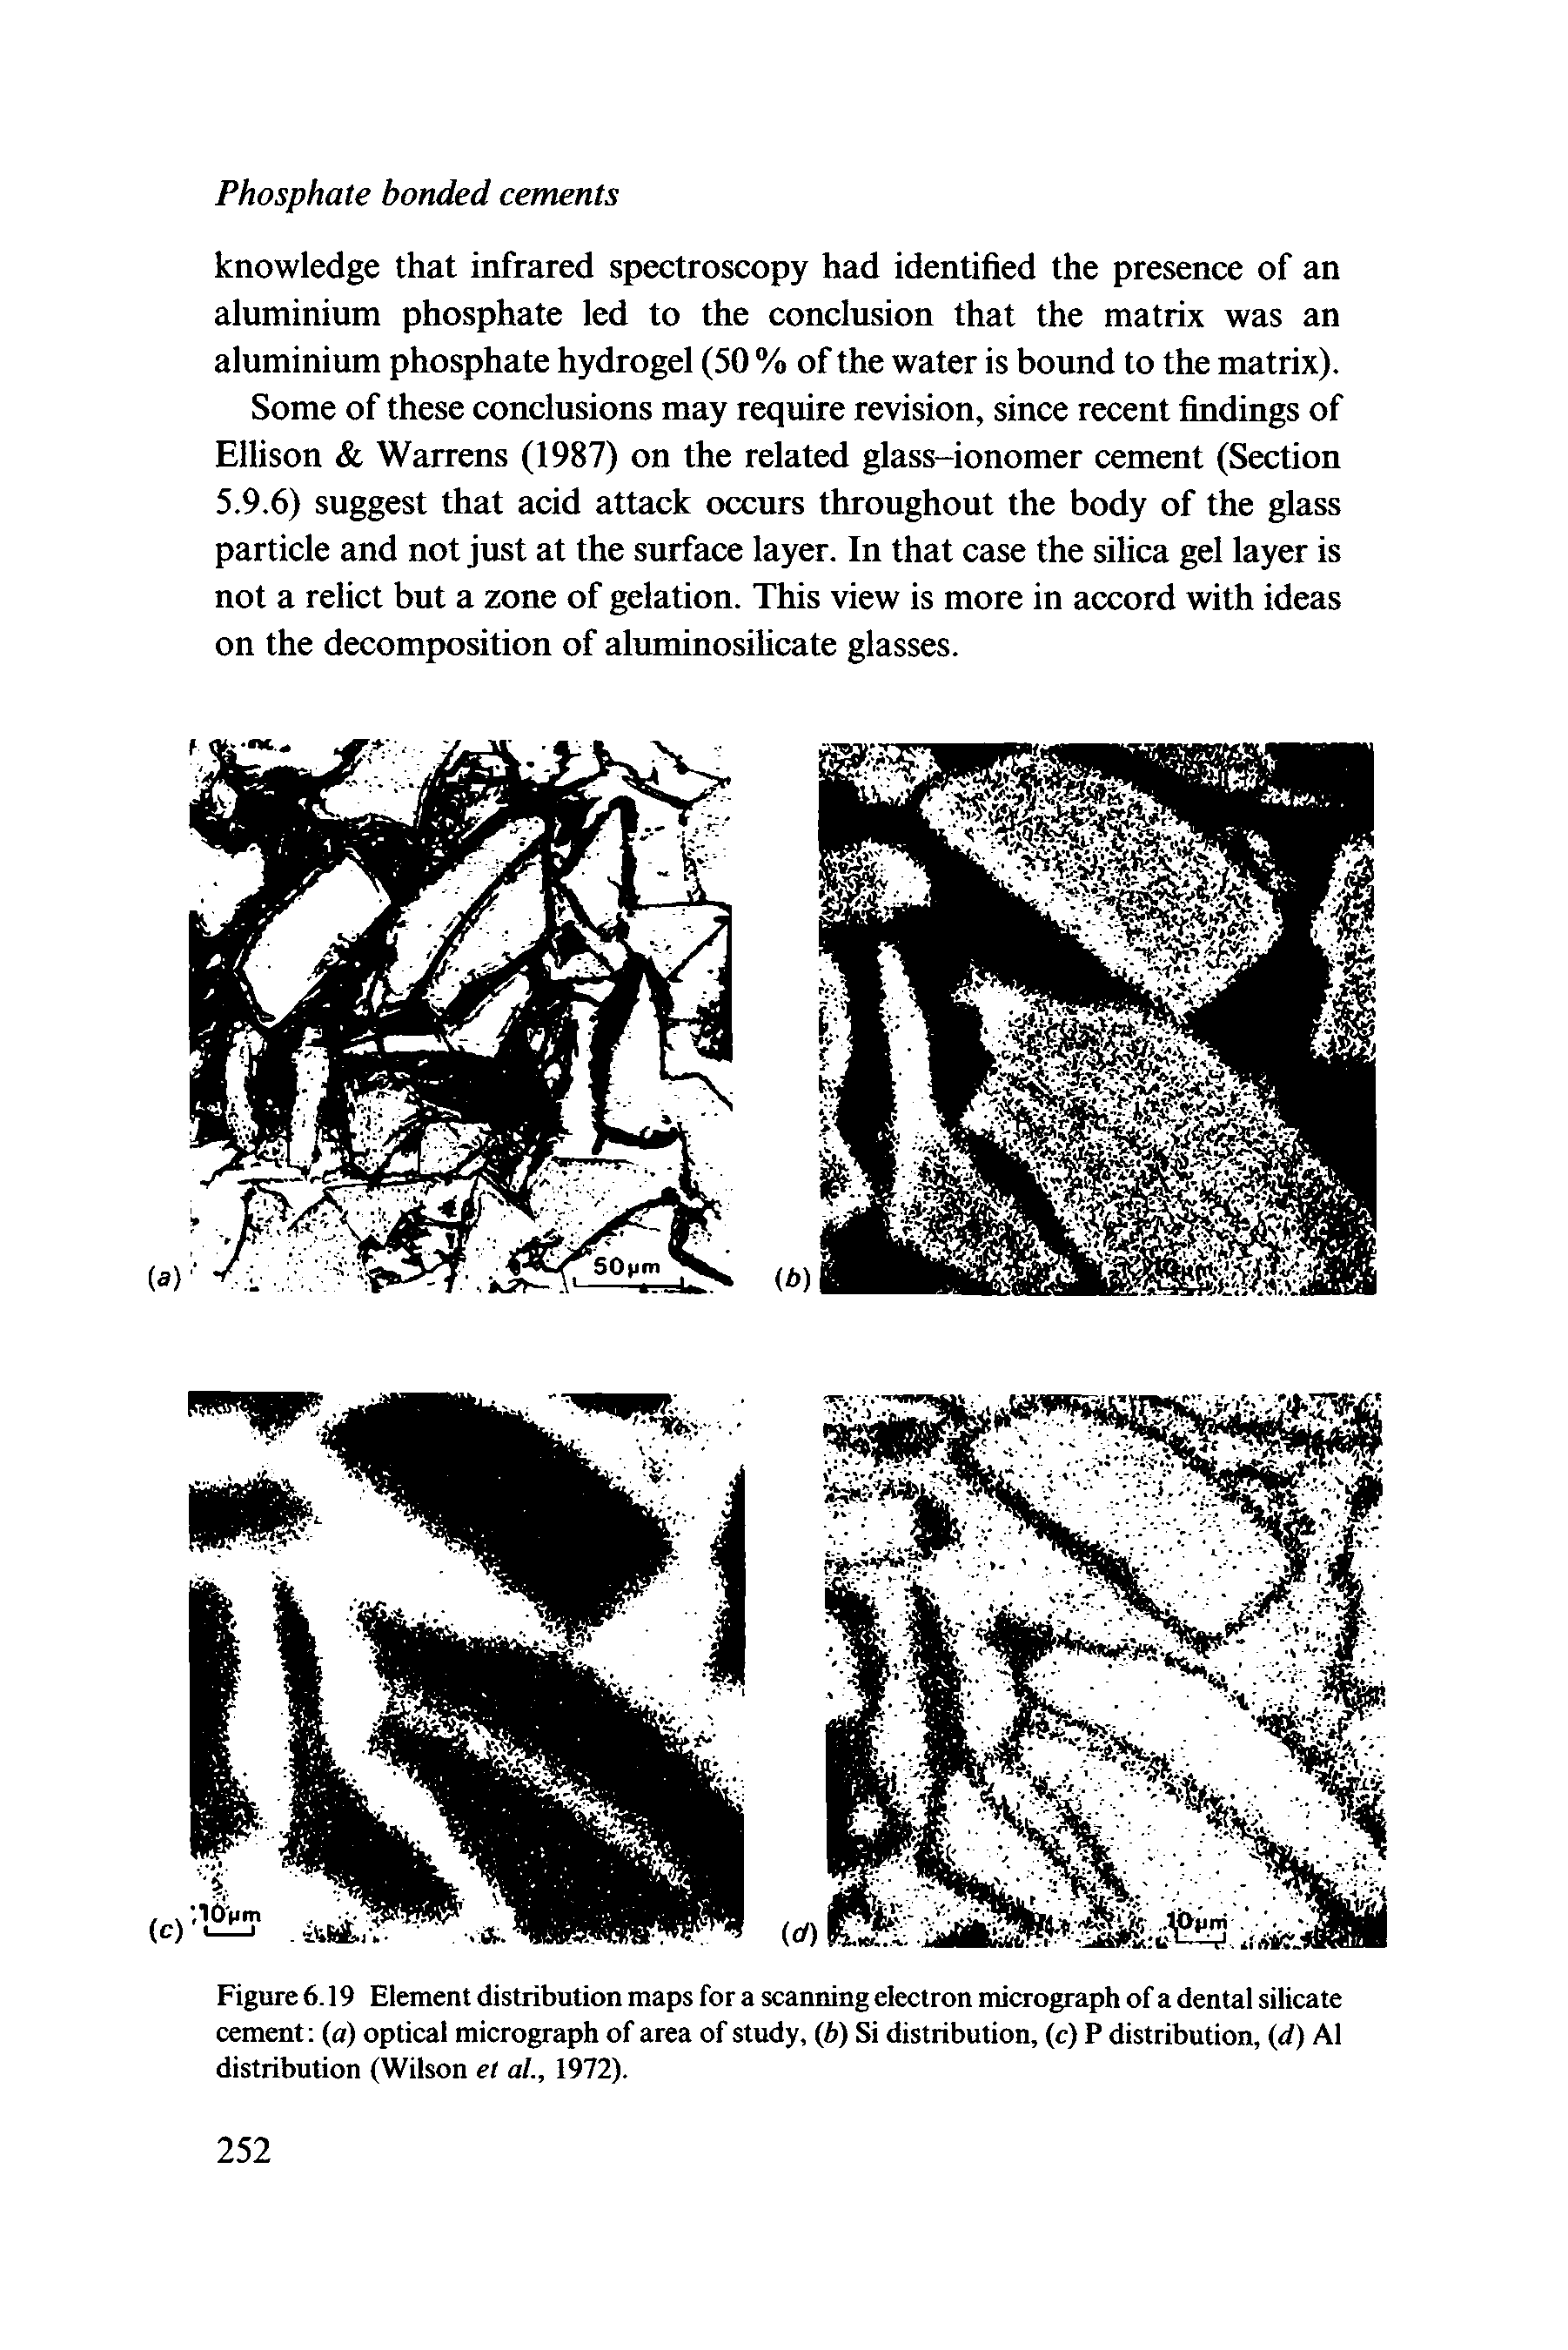 Figure 6.19 Element distribution maps for a scanning electron micrograph of a dental silicate cement (a) optical micrograph of area of study, (b) Si distribution, (c) P distribution, d) A1 distribution (Wilson et at., 1972).